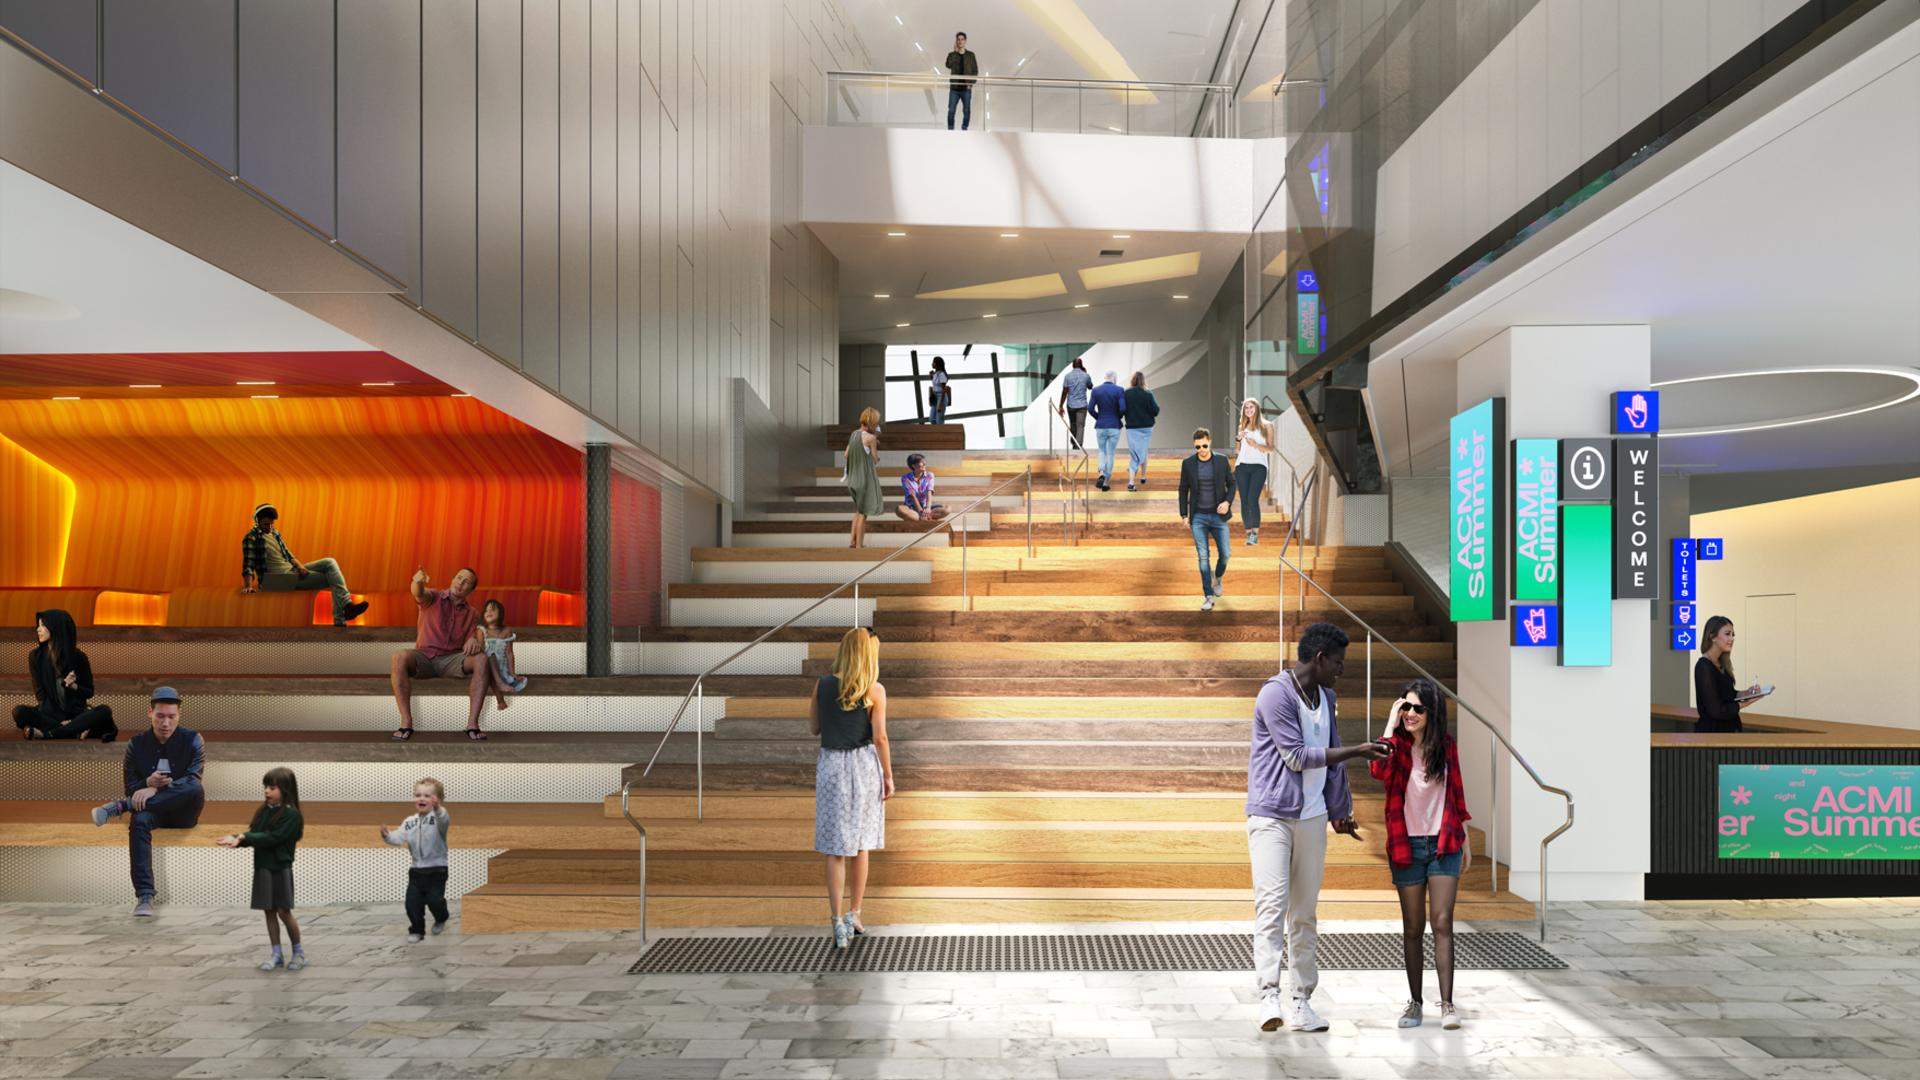 Here's What ACMI Will Look Like After Its Multimillion-Dollar Makeover